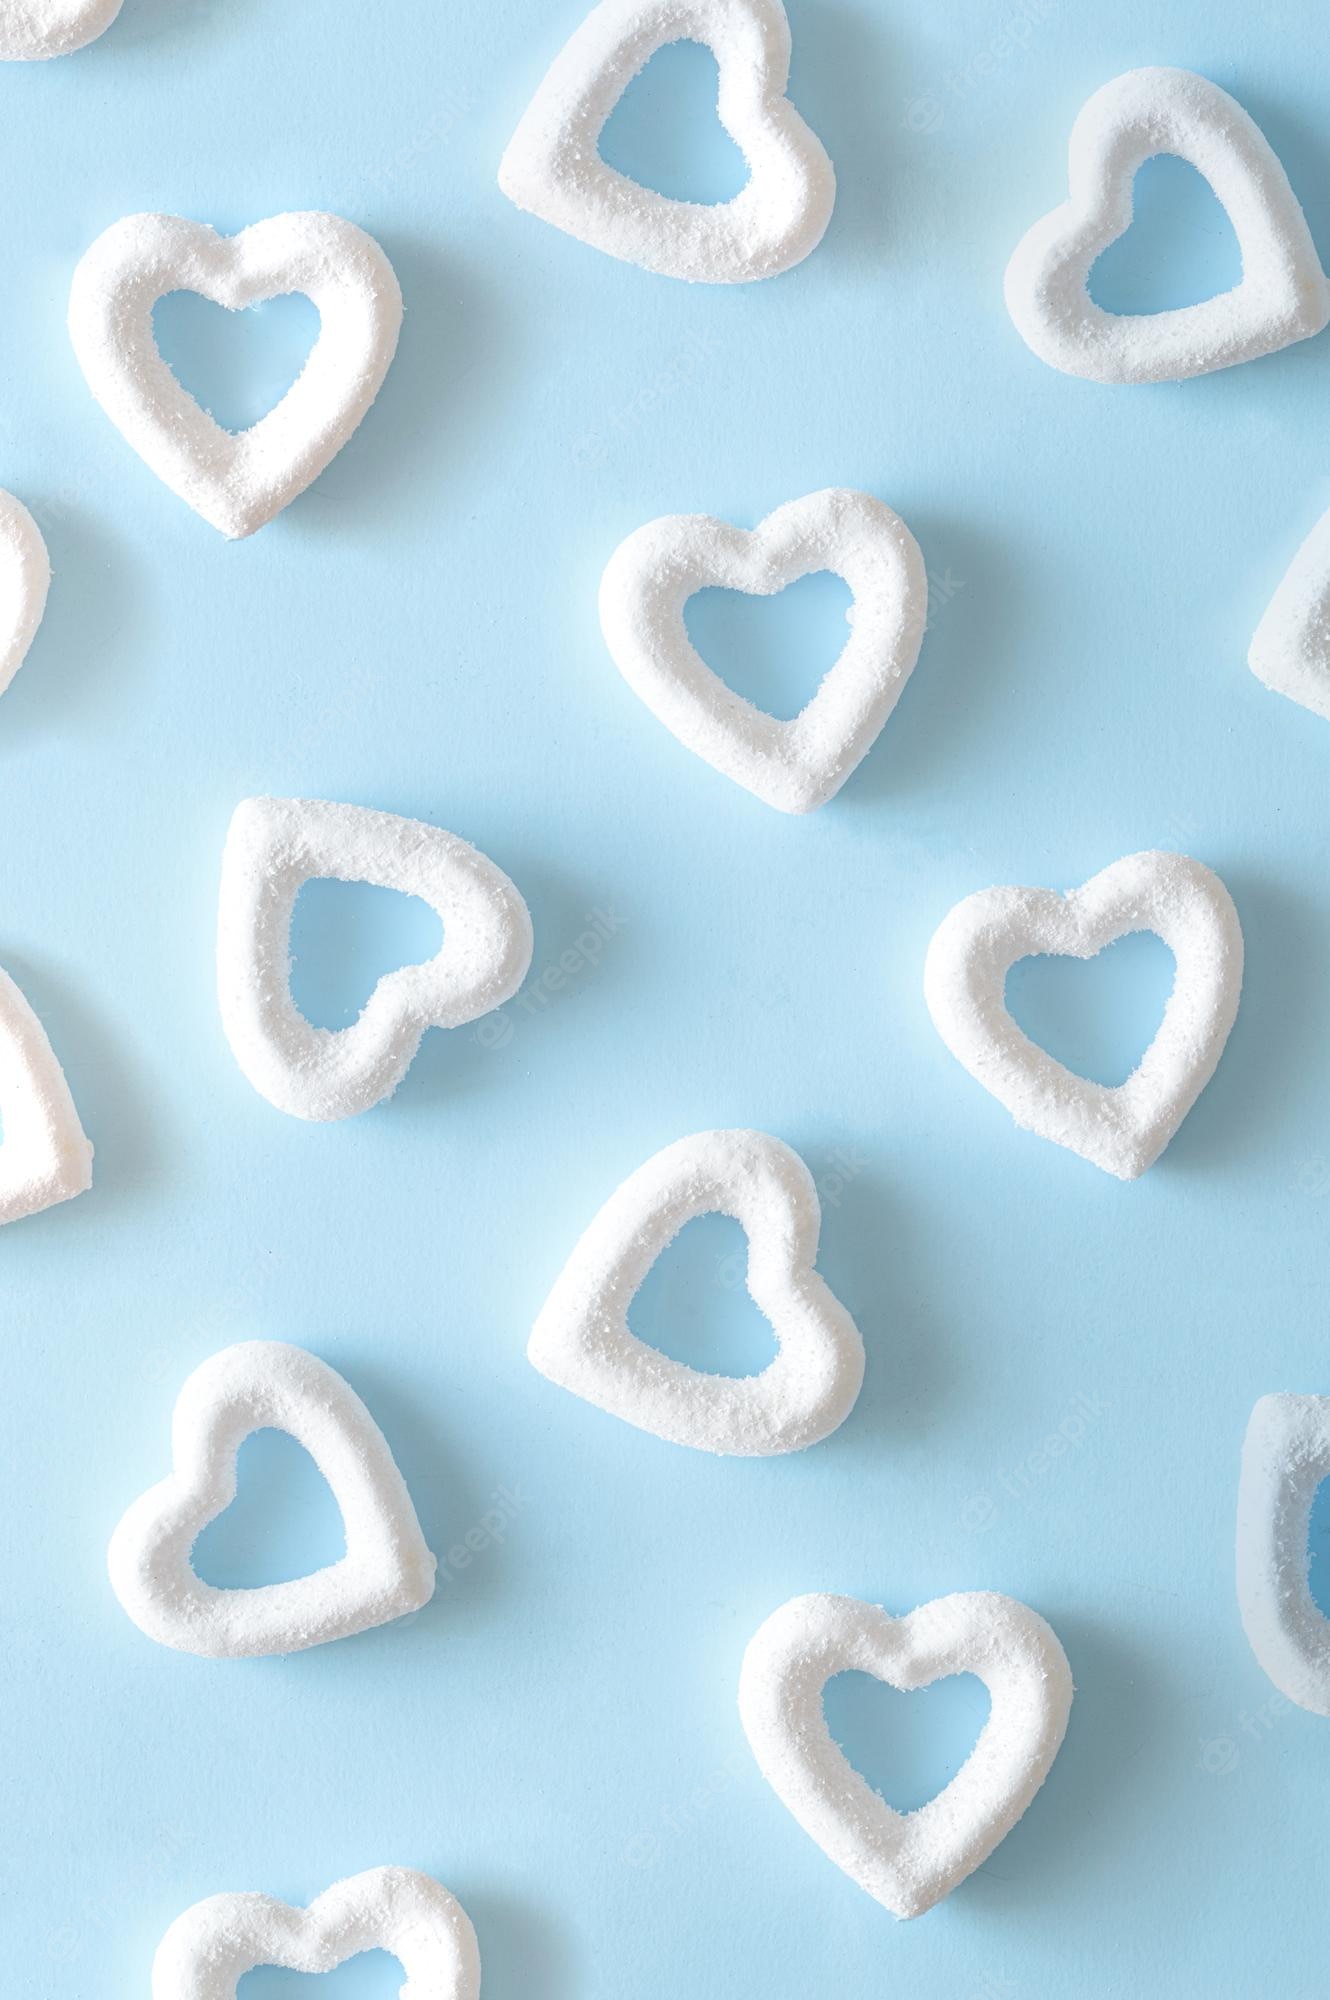 Premium Photo. White hearts on a blue background minimal aesthetic love valentines wallpaper